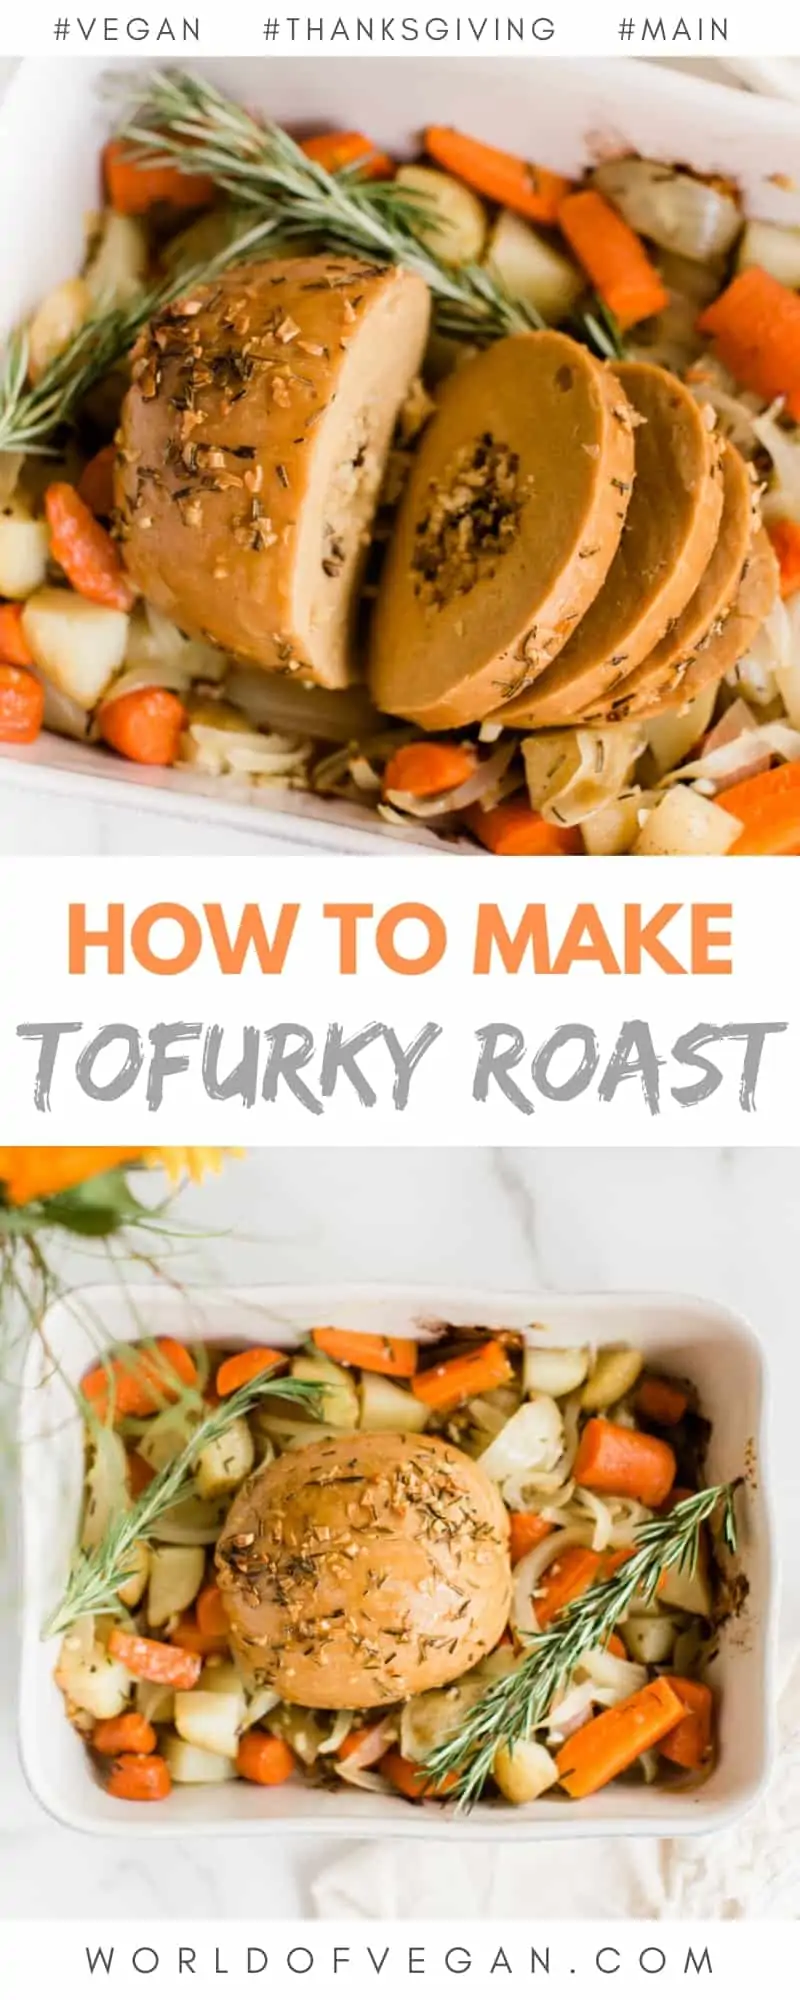 How to Cook Tofurky Roast for a Vegan Thanksgiving